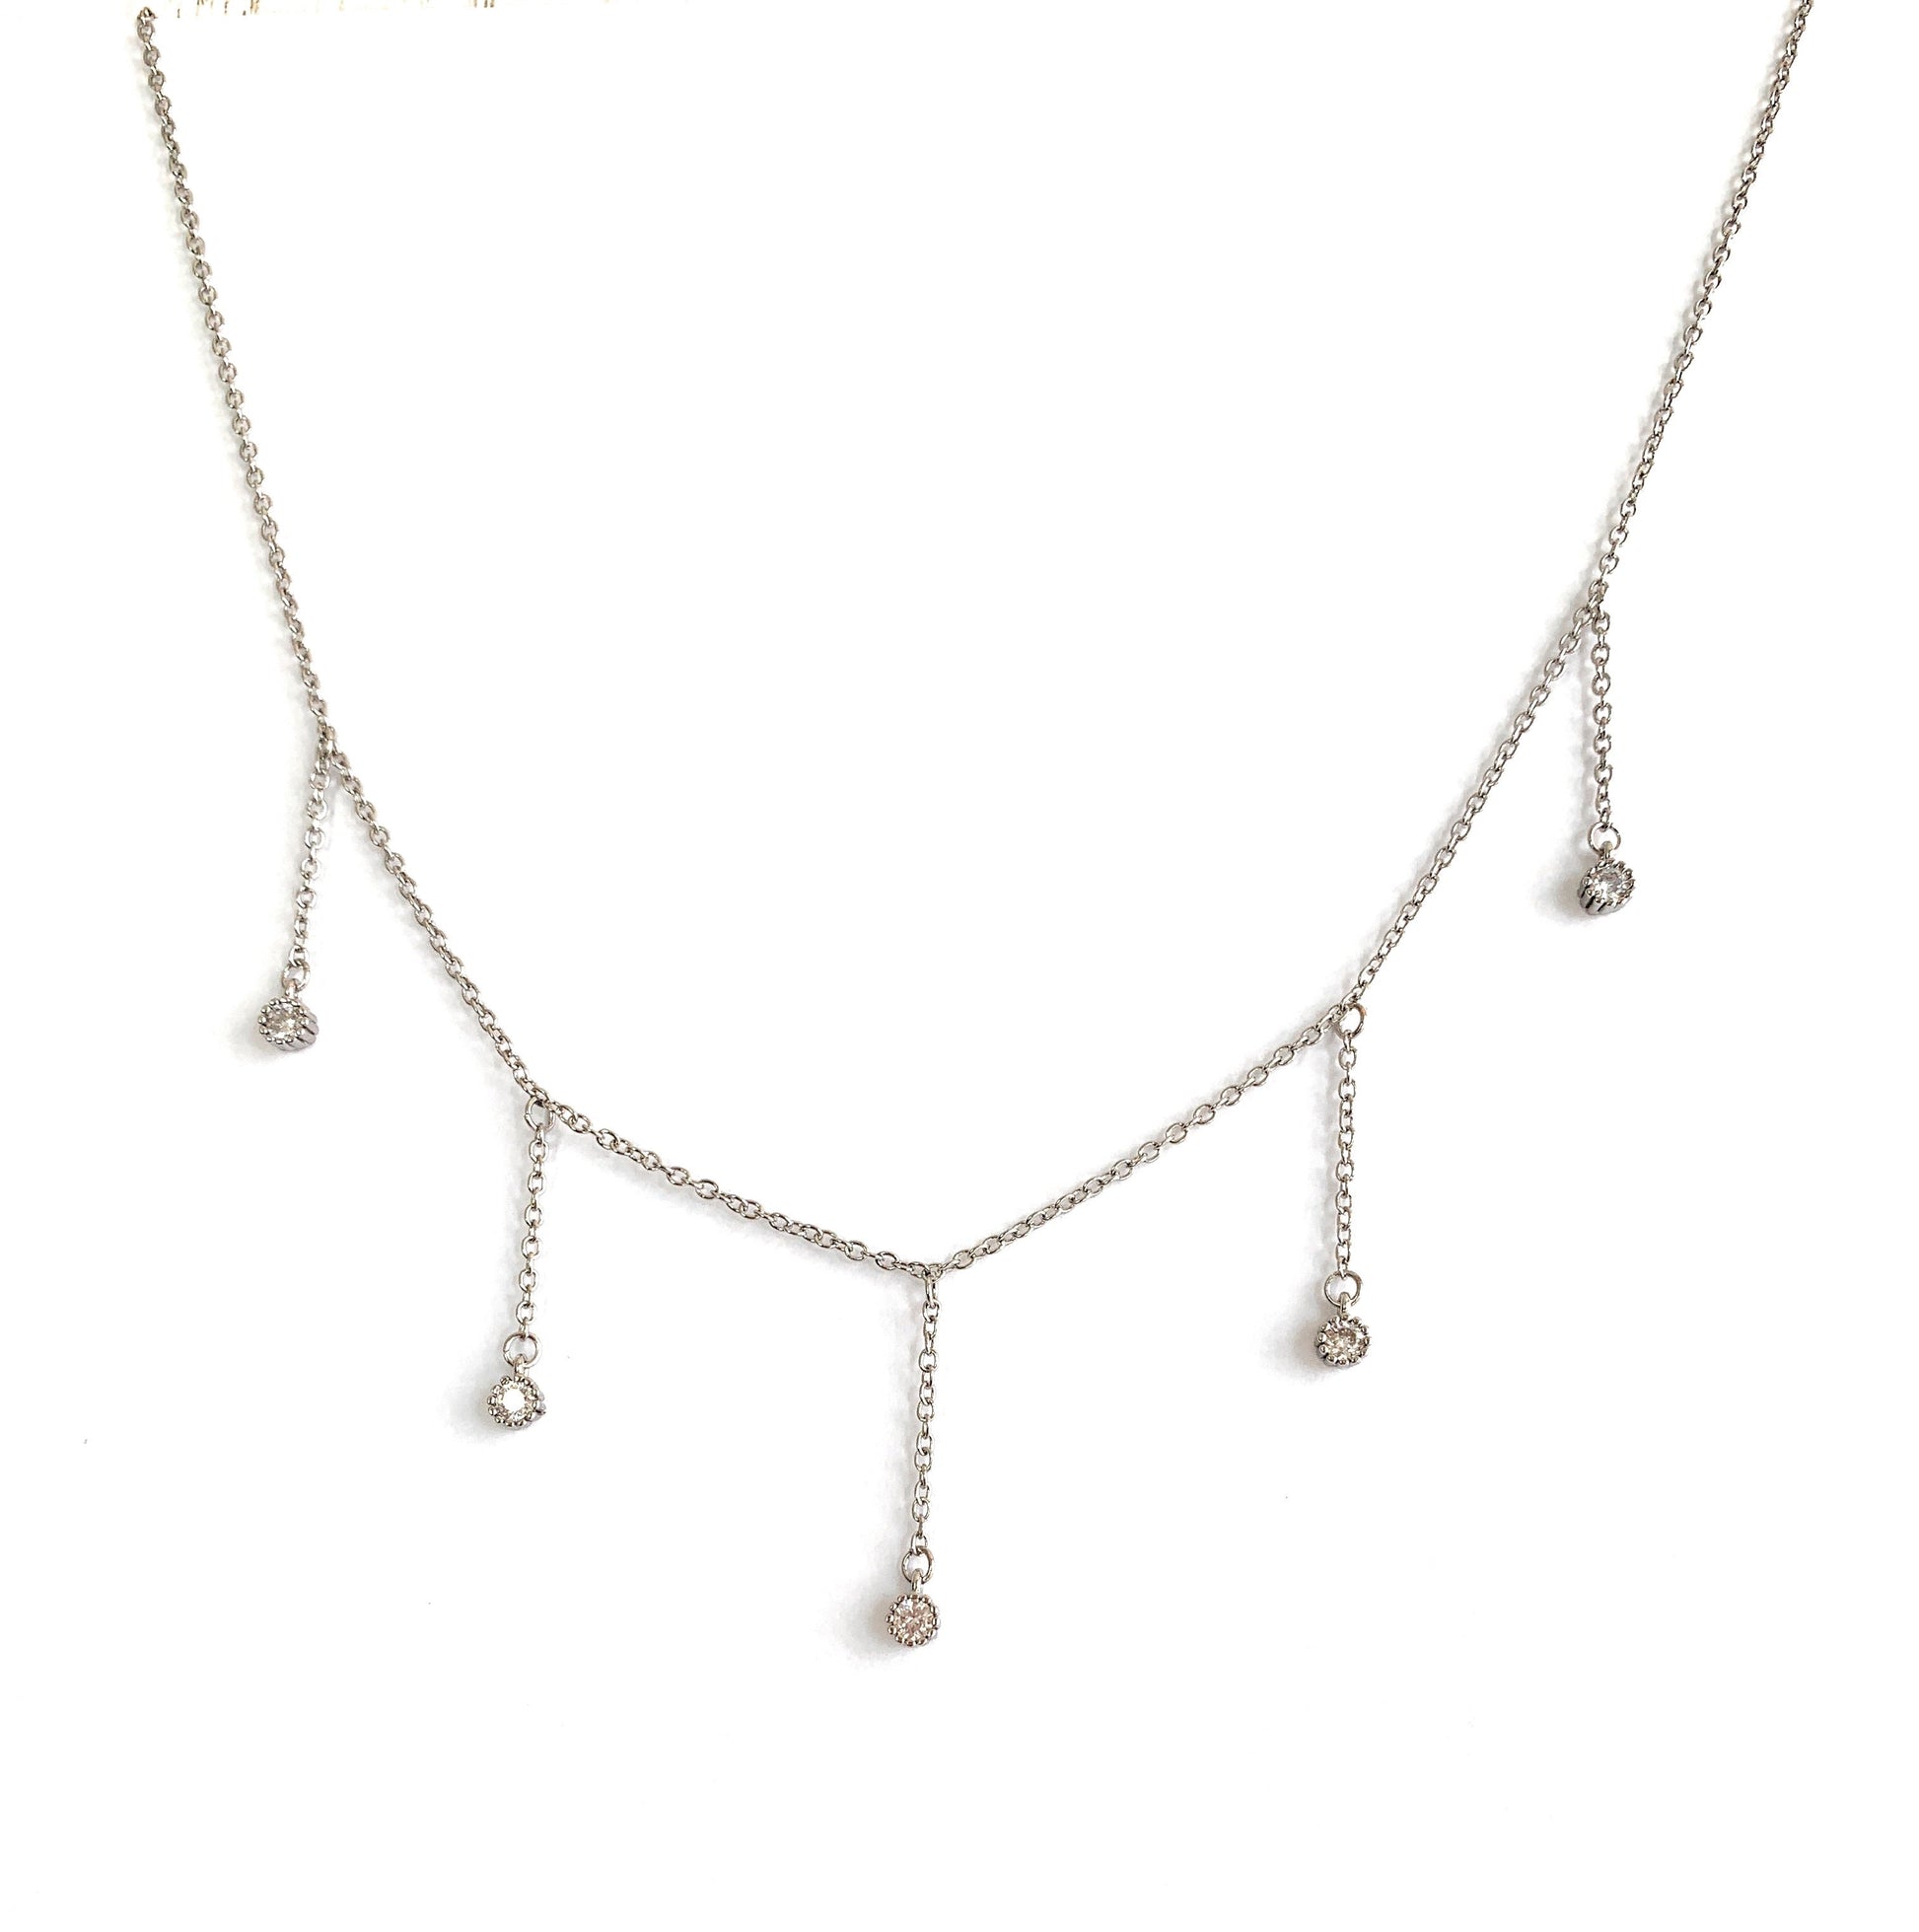 Drop Necklace for Women in Gold or Silver with Five Cubic Zirconia Stone - Hollywood Sensation®